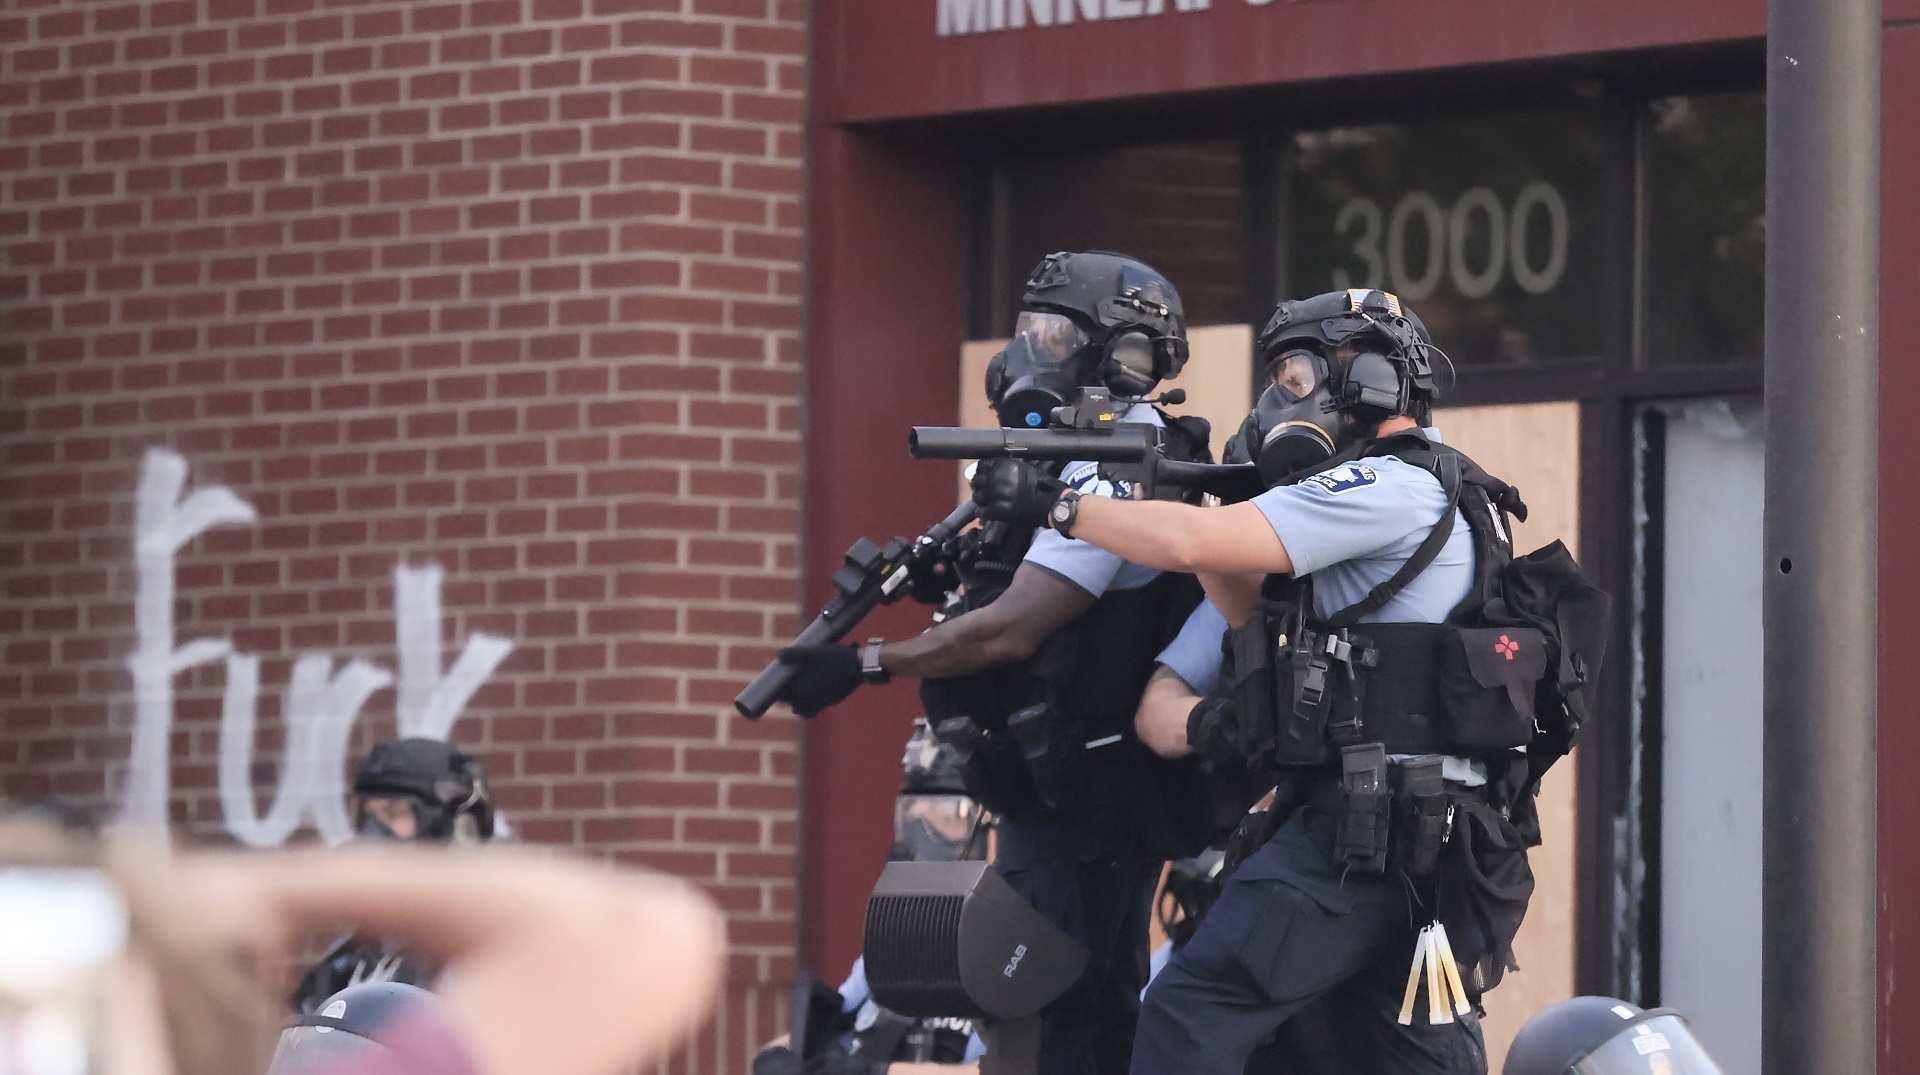 epa08448787 Minneapolis police in riot gear outside the 3rd Precinct as a second day of protests continue over the arrest of George Floyd, who later died in police custody, in Minneapolis, Minnesota, USA, 27 May 2020. A bystander's video posted online on 25 May appeared to show George Floyd, 46, pleading with arresting officers that he couldn't breathe as an officer knelt on his neck. The unarmed black man later died in police custody.  EPA/TANNEN MAURY